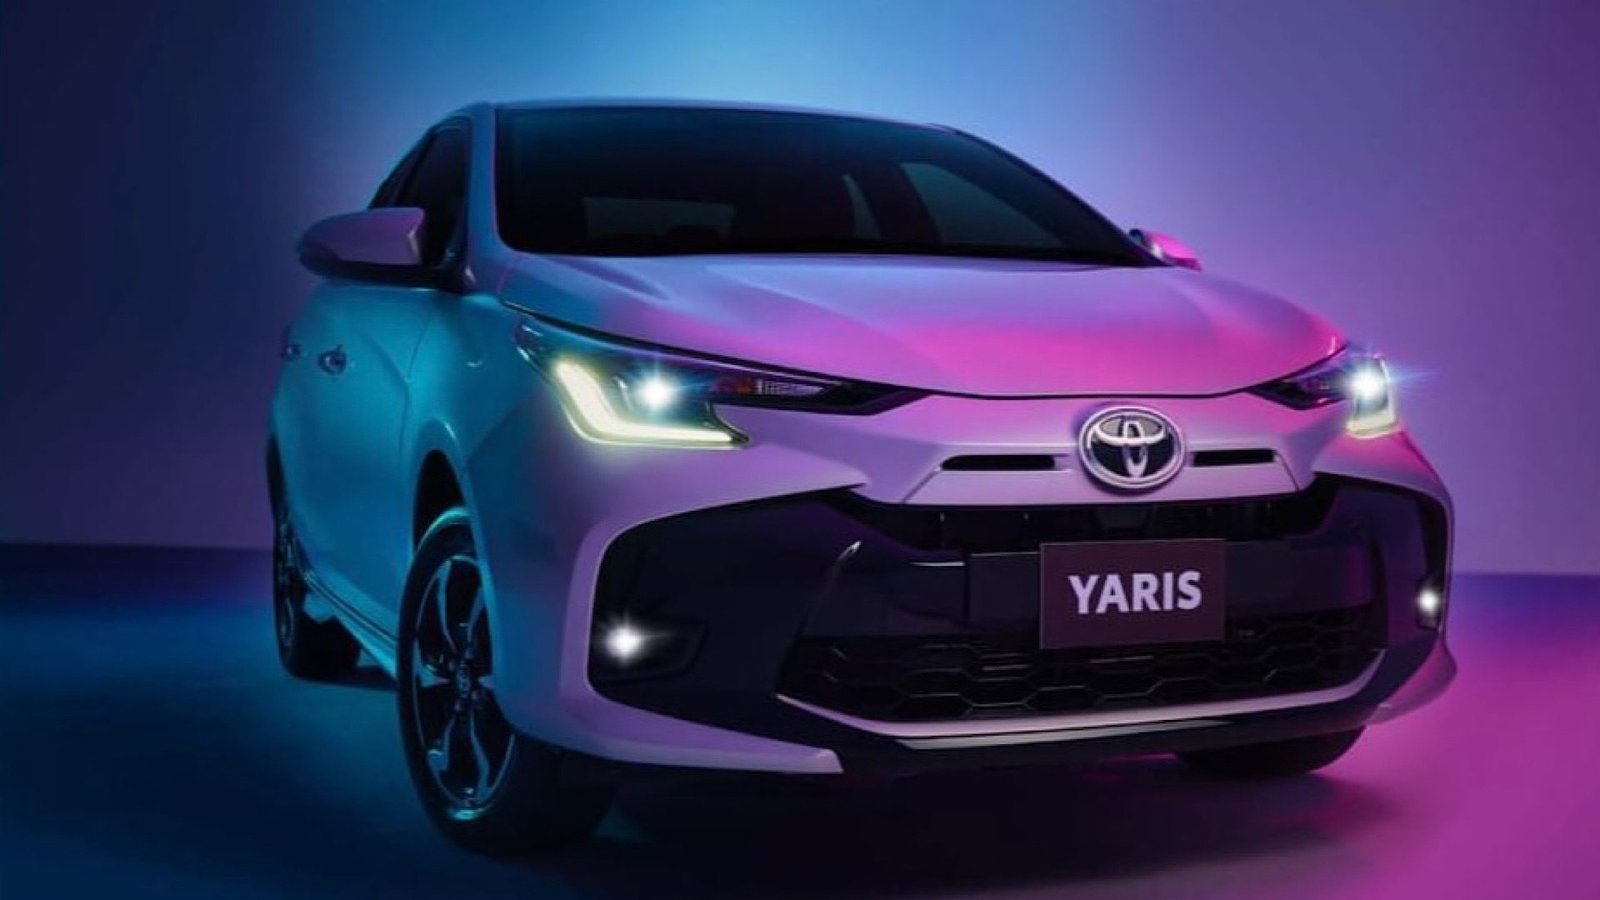 Toyota Yaris facelift launched in Pakistan